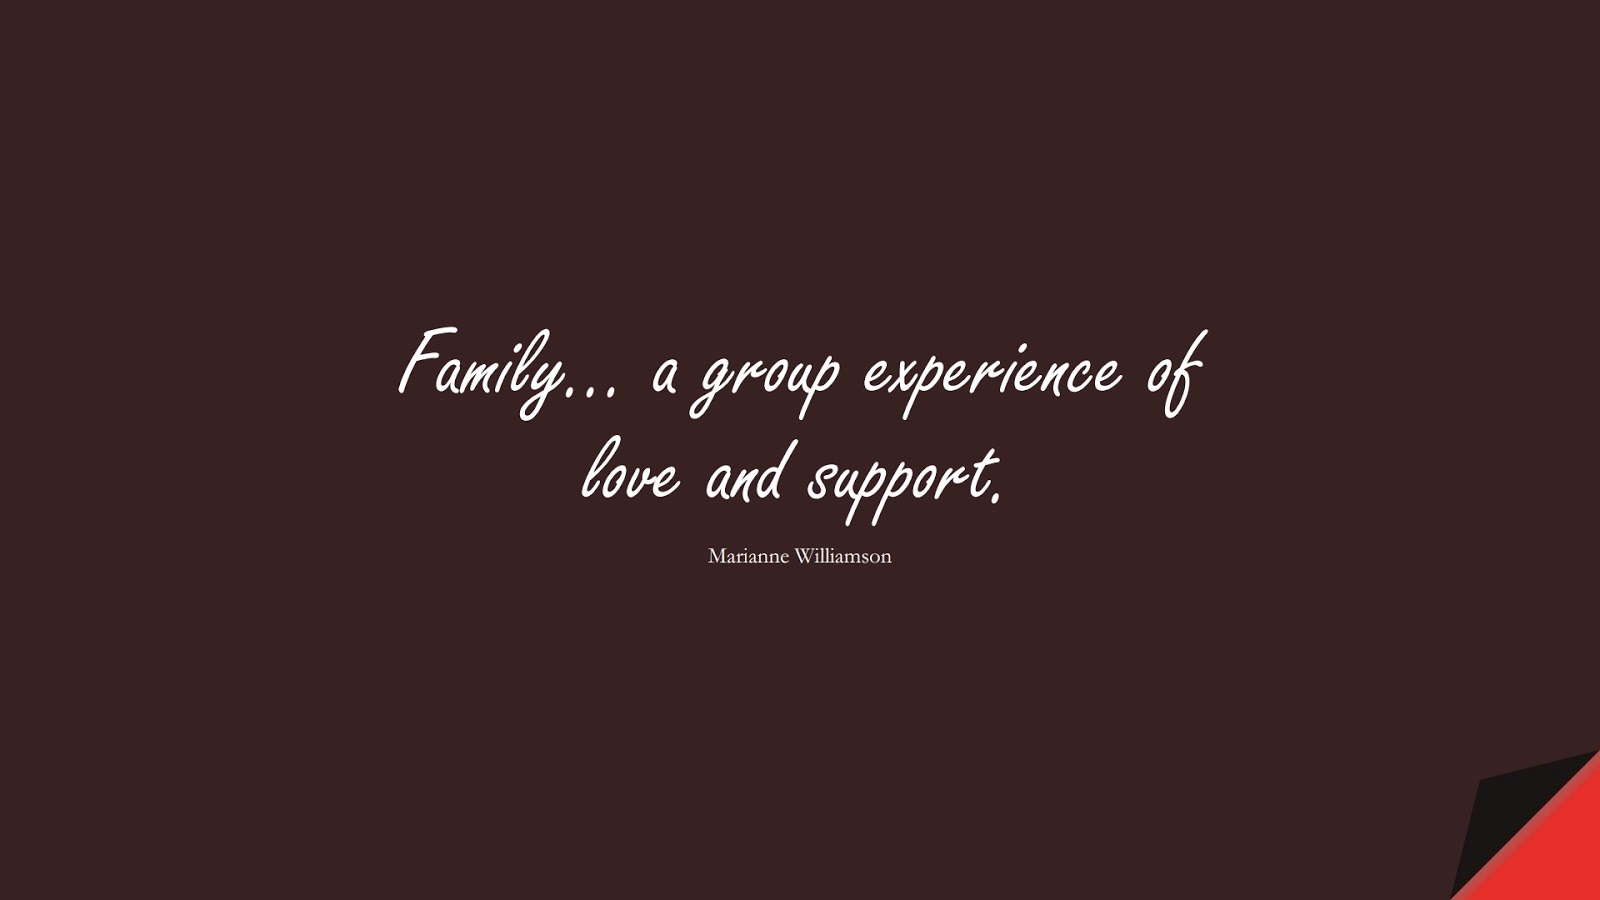 Family… a group experience of love and support. (Marianne Williamson);  #FamilyQuotes